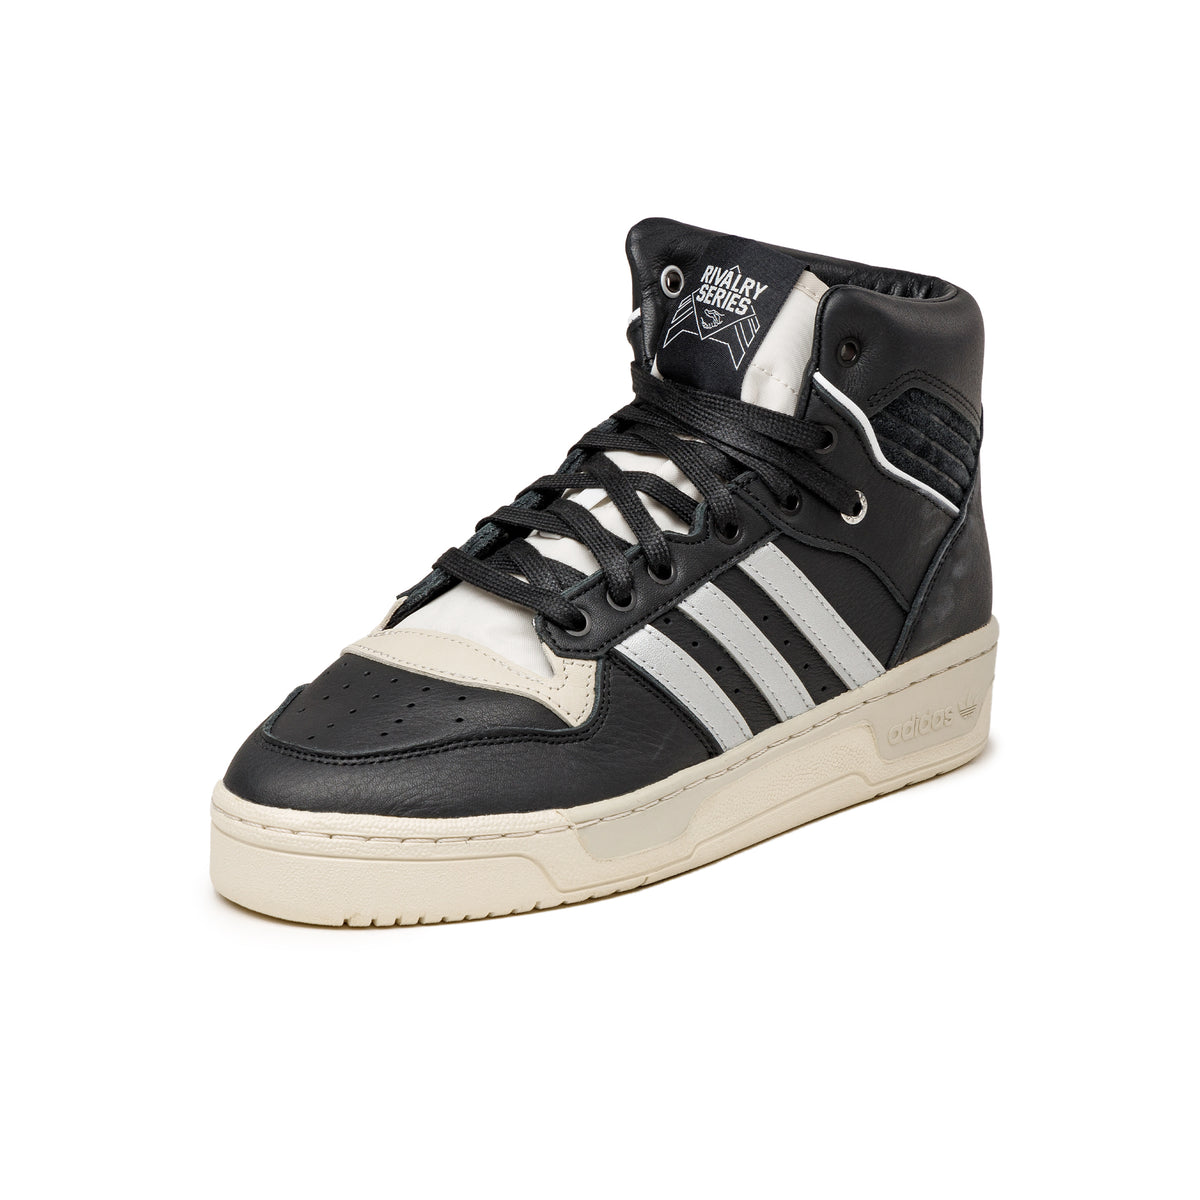 Adidas Rivalry Hi Consortium – buy now at Asphaltgold Online Store!